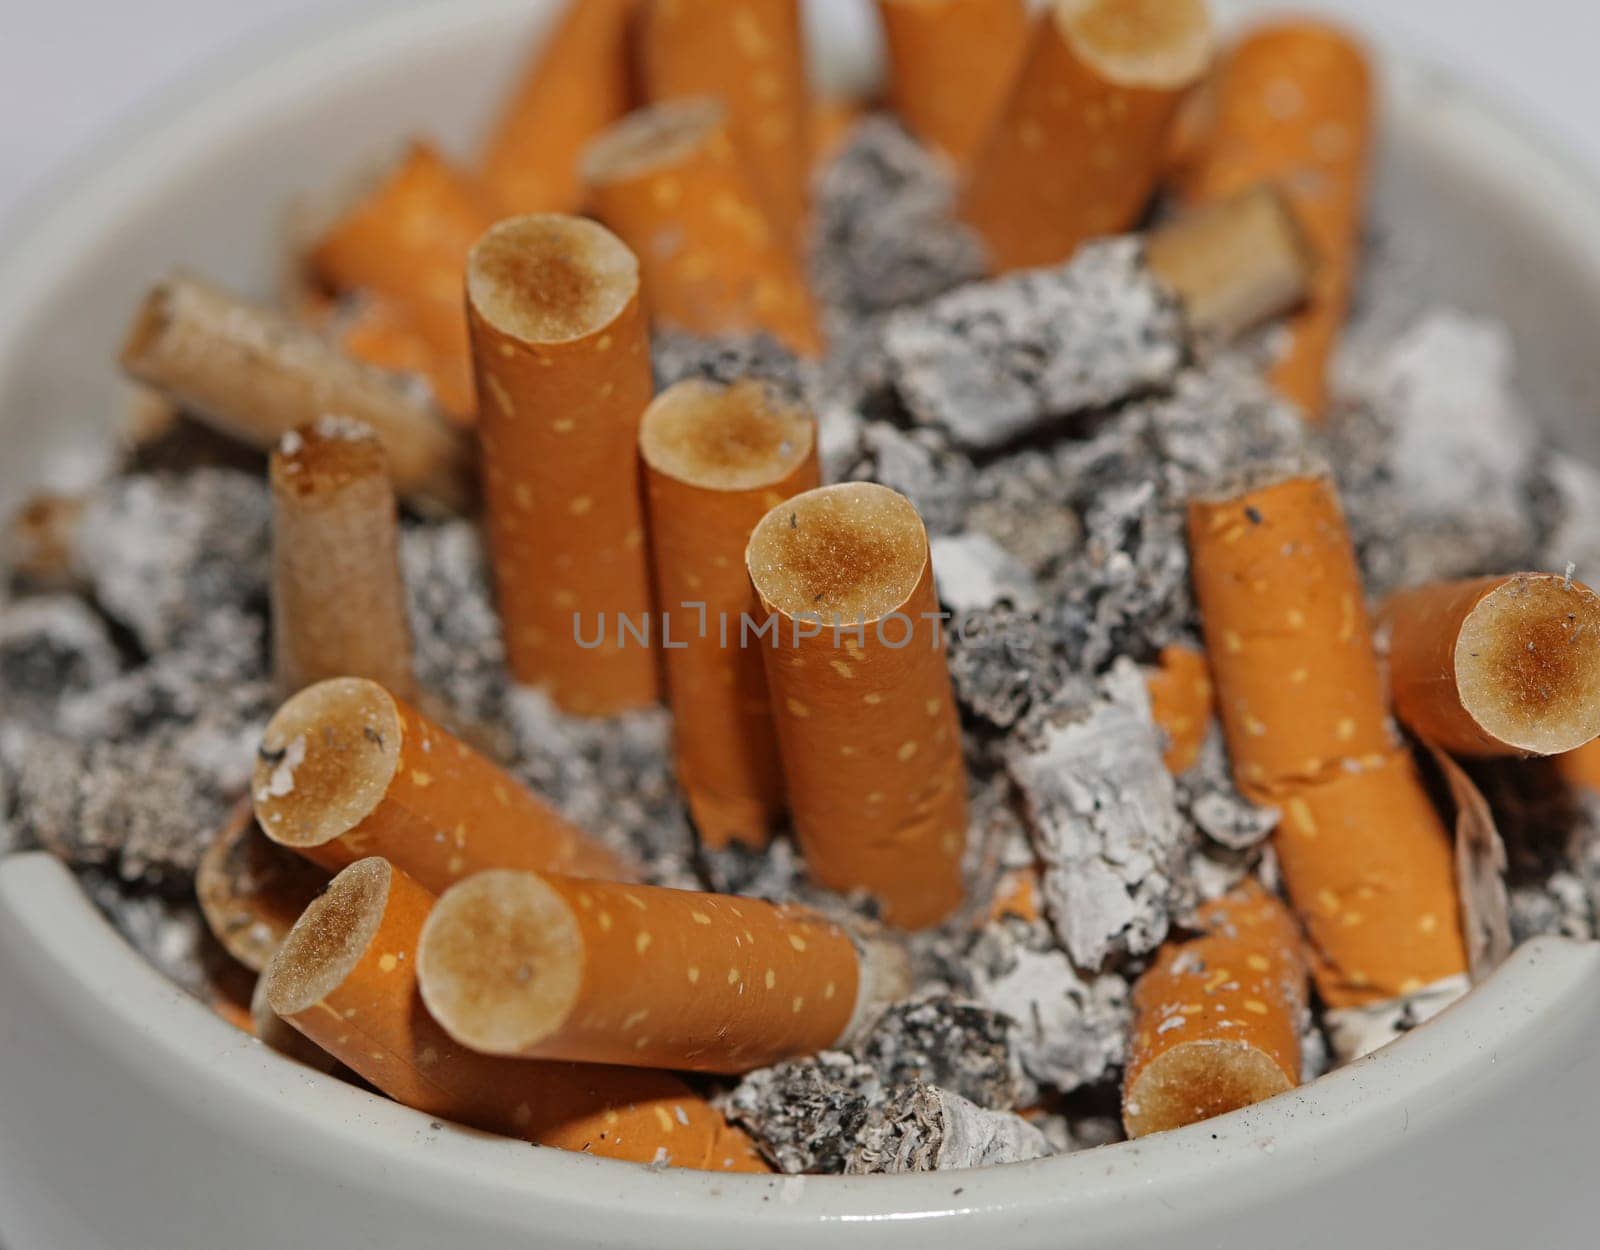 Full ashtray of cigarettes close up macro view smoking habits hi-res stock photography and images high quality big size instant download by BakalaeroZz